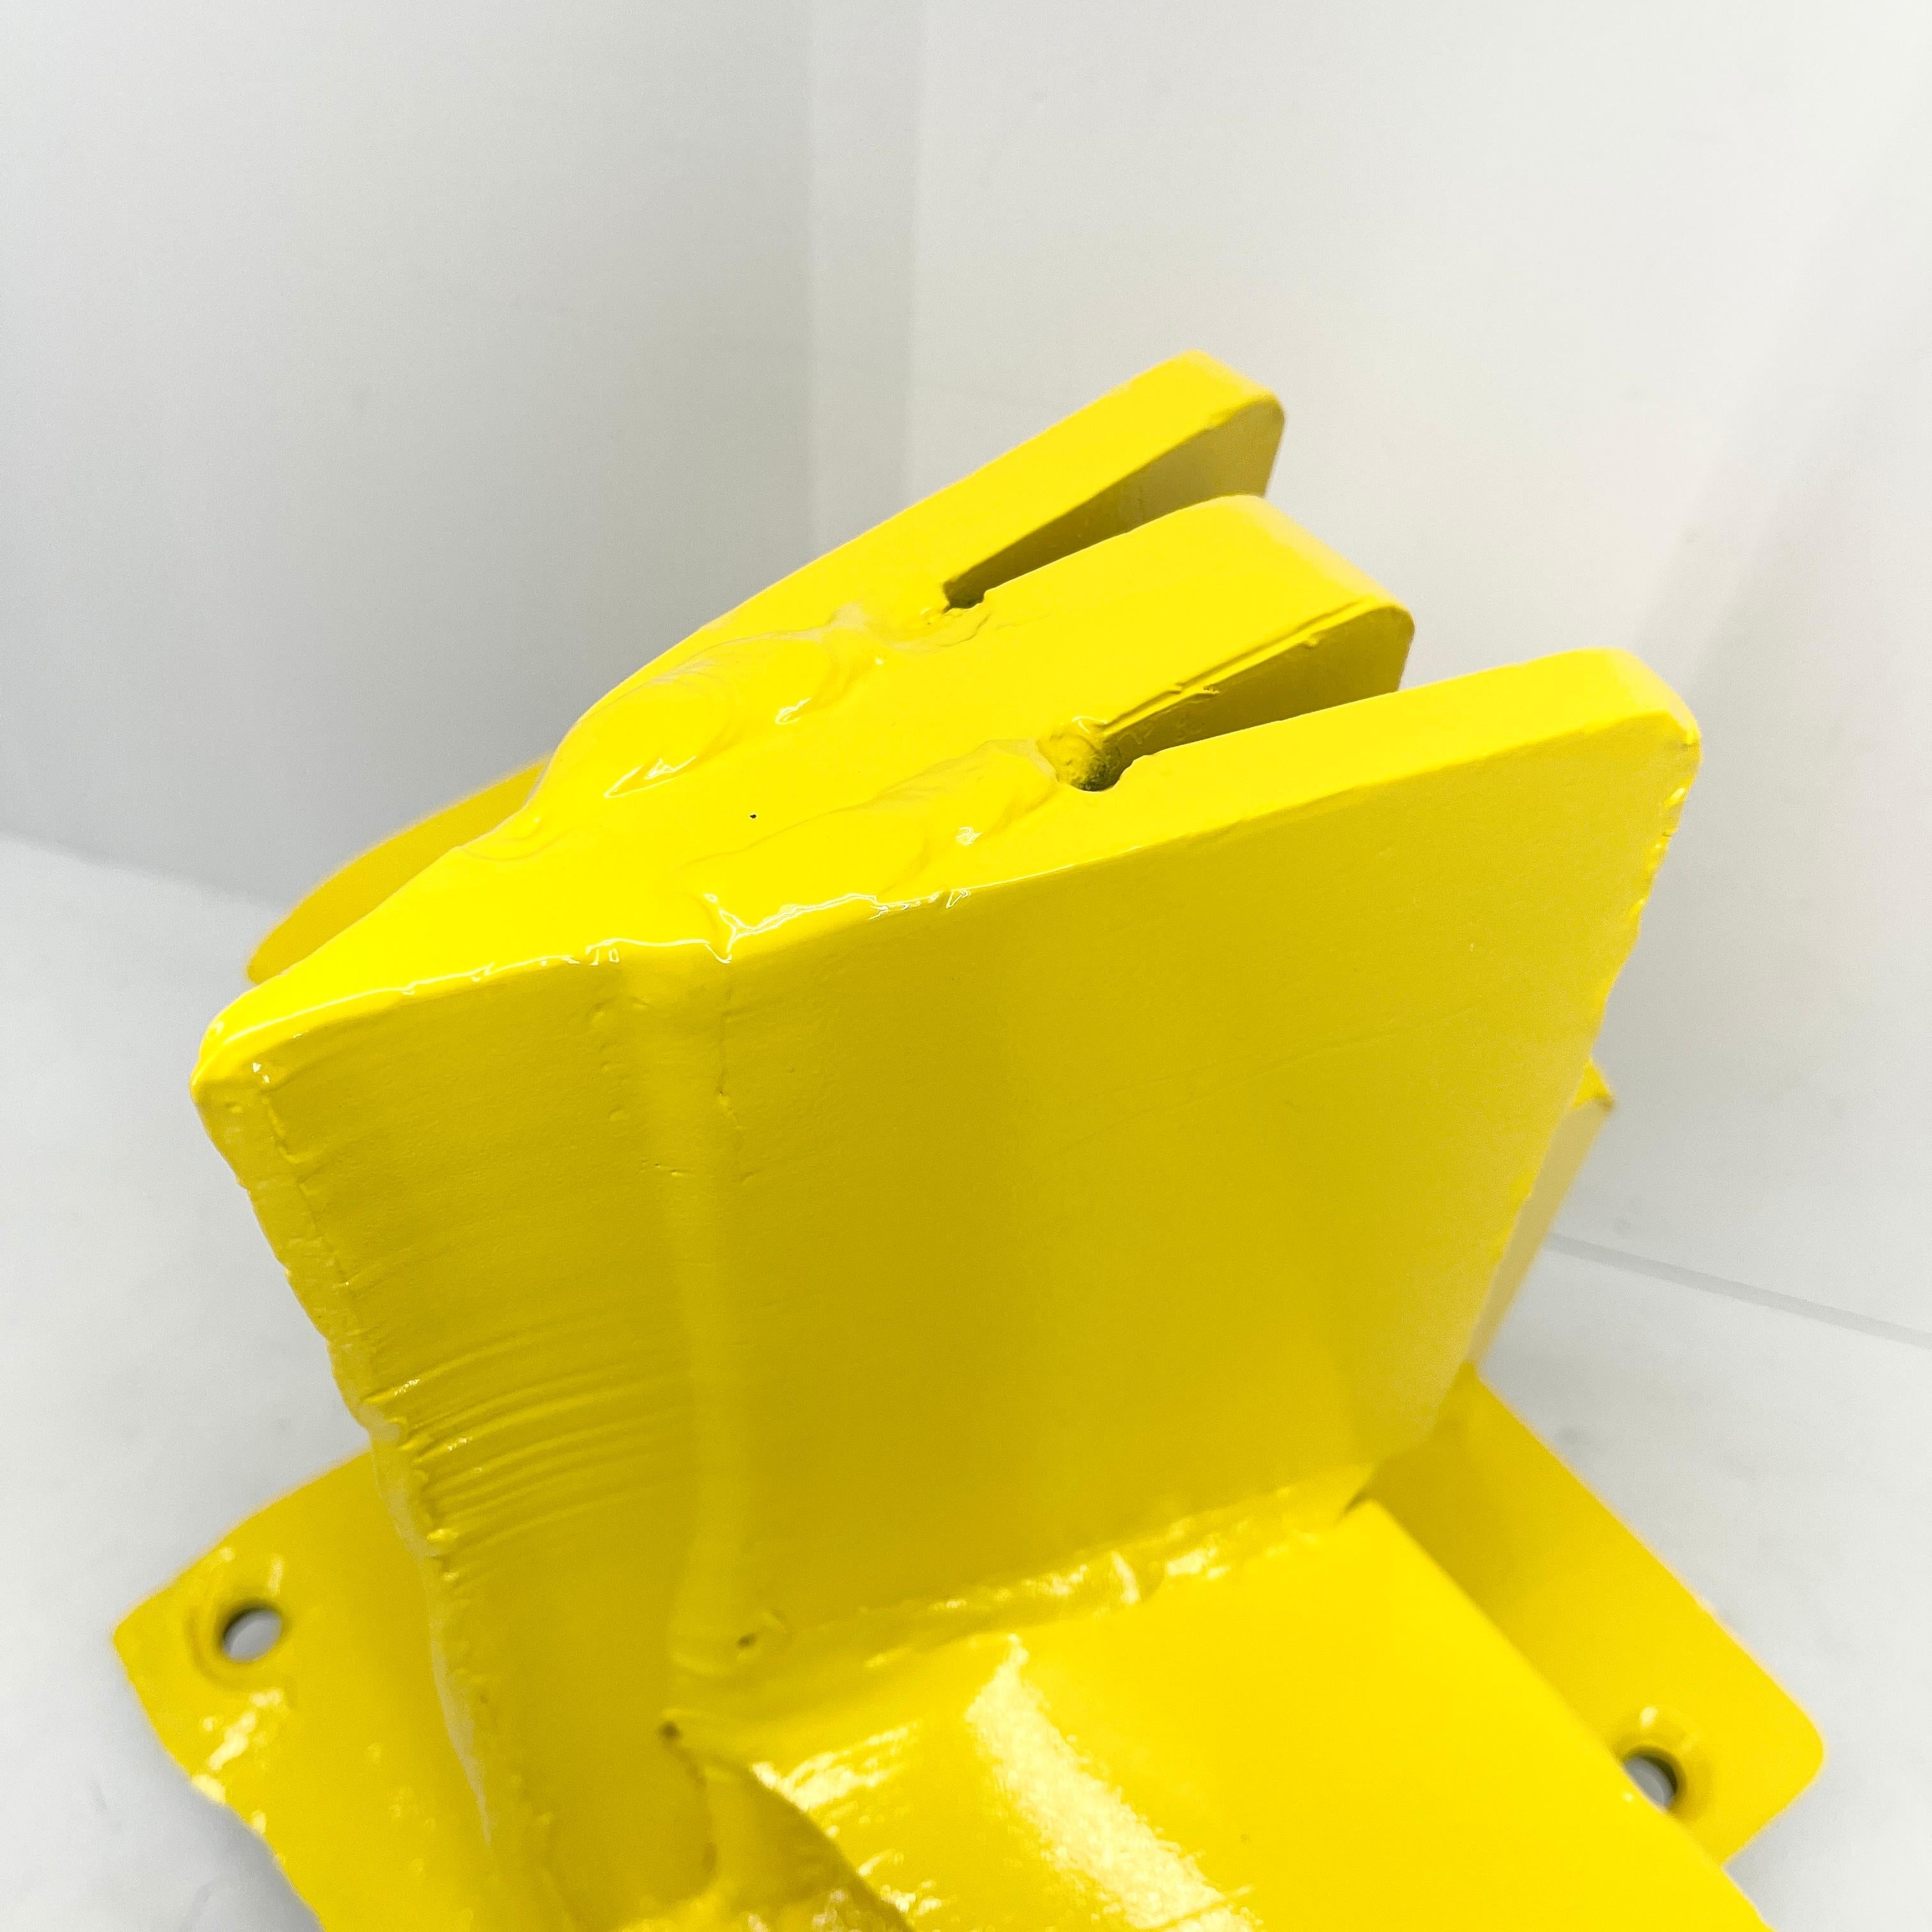 Bright Sunshine Yellow Abstract Eagle Head Sculpture From a 3 Way Wood Splitter For Sale 3